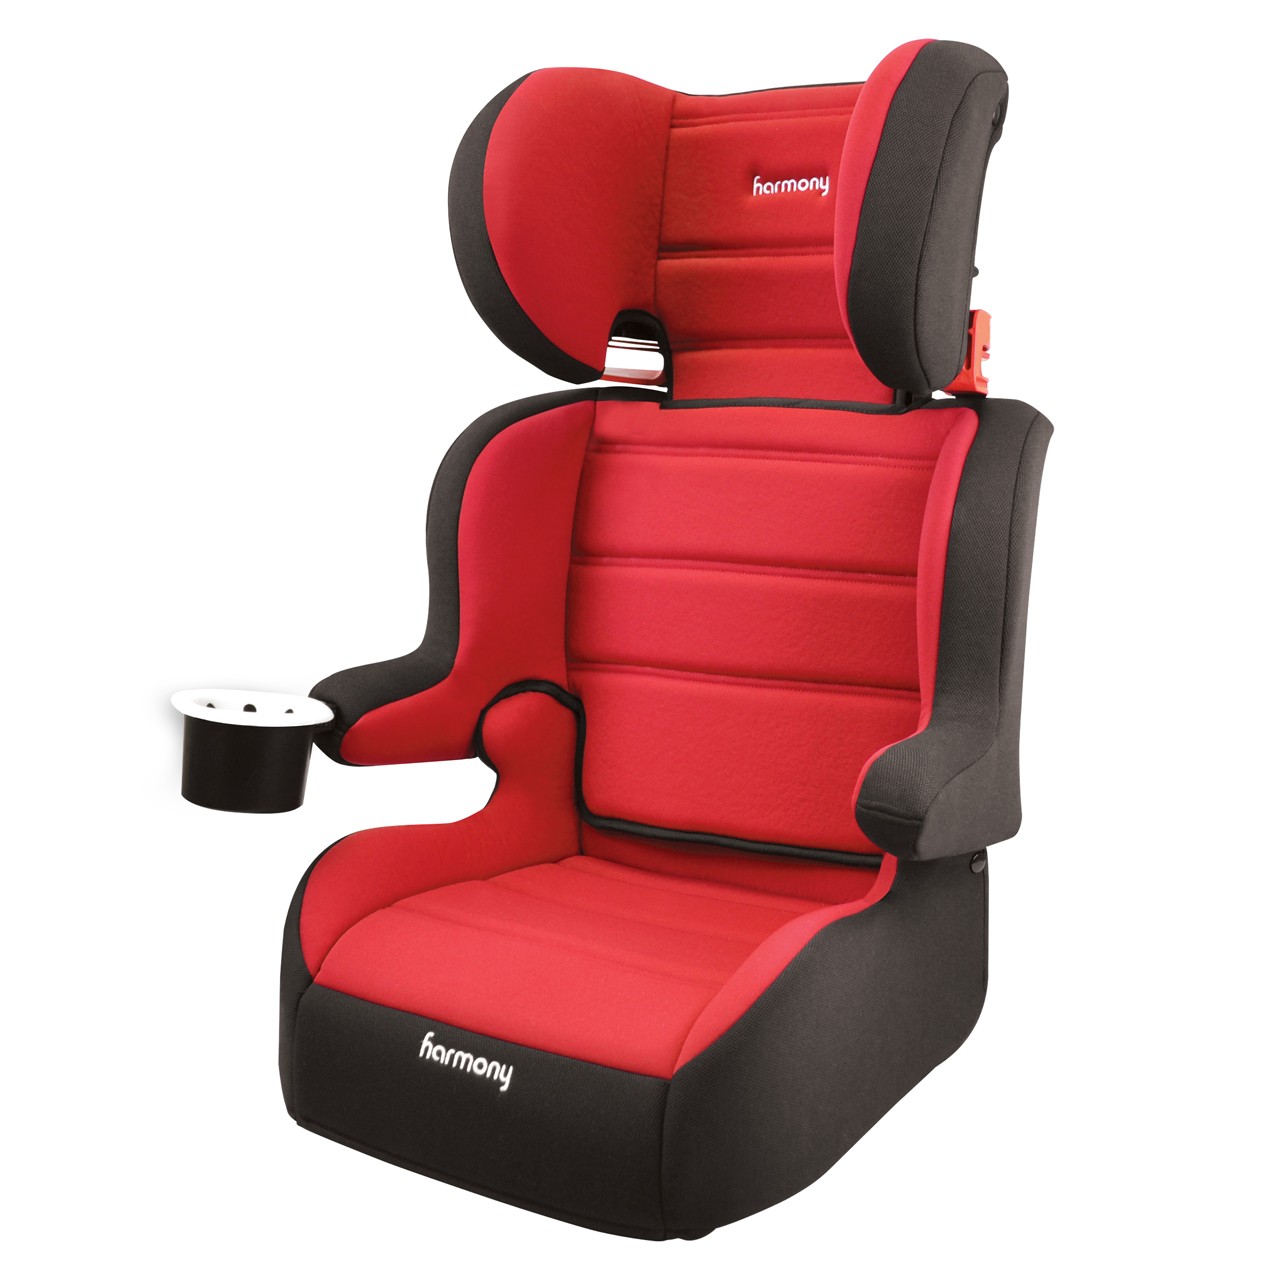 The Best Car Booster Seats for Travel